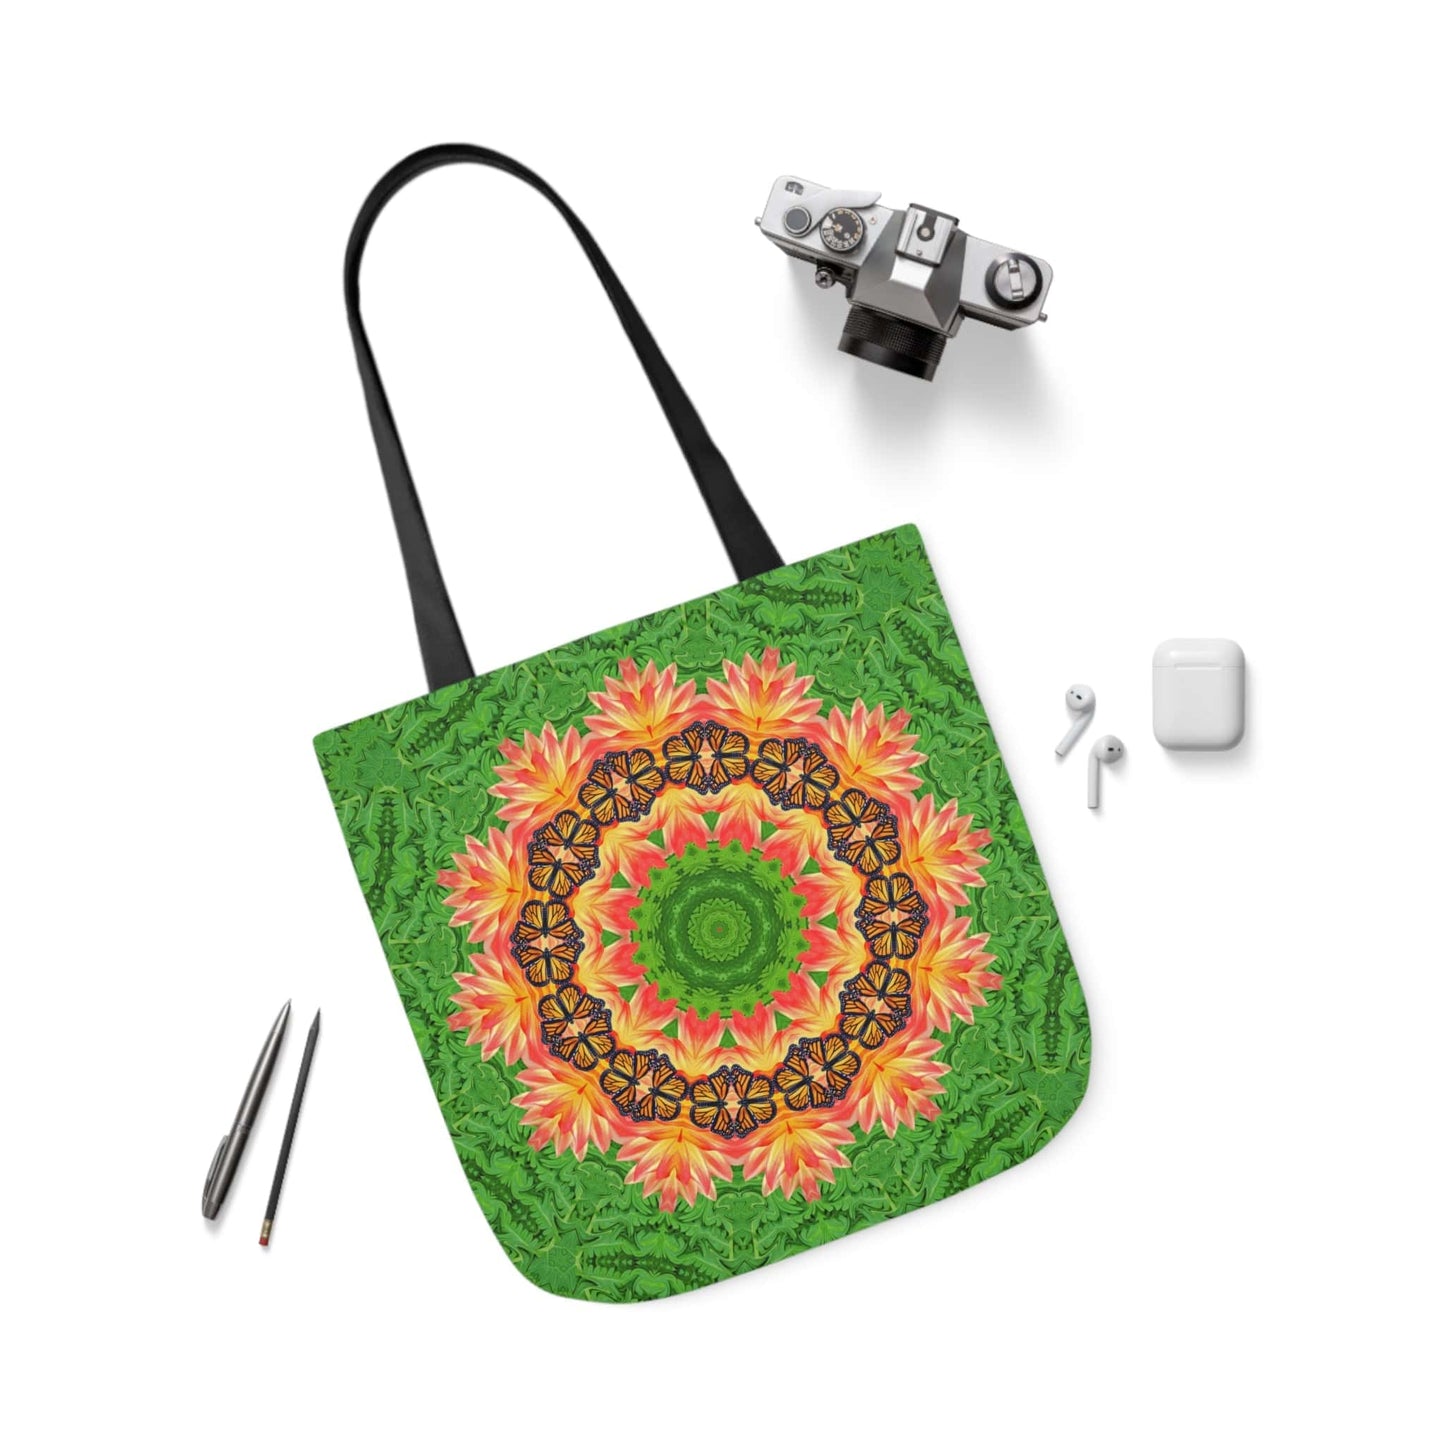 Monarch Butterfly Floral Mandala Tote Bag - Cute and Practical Everyday Accessory black handle